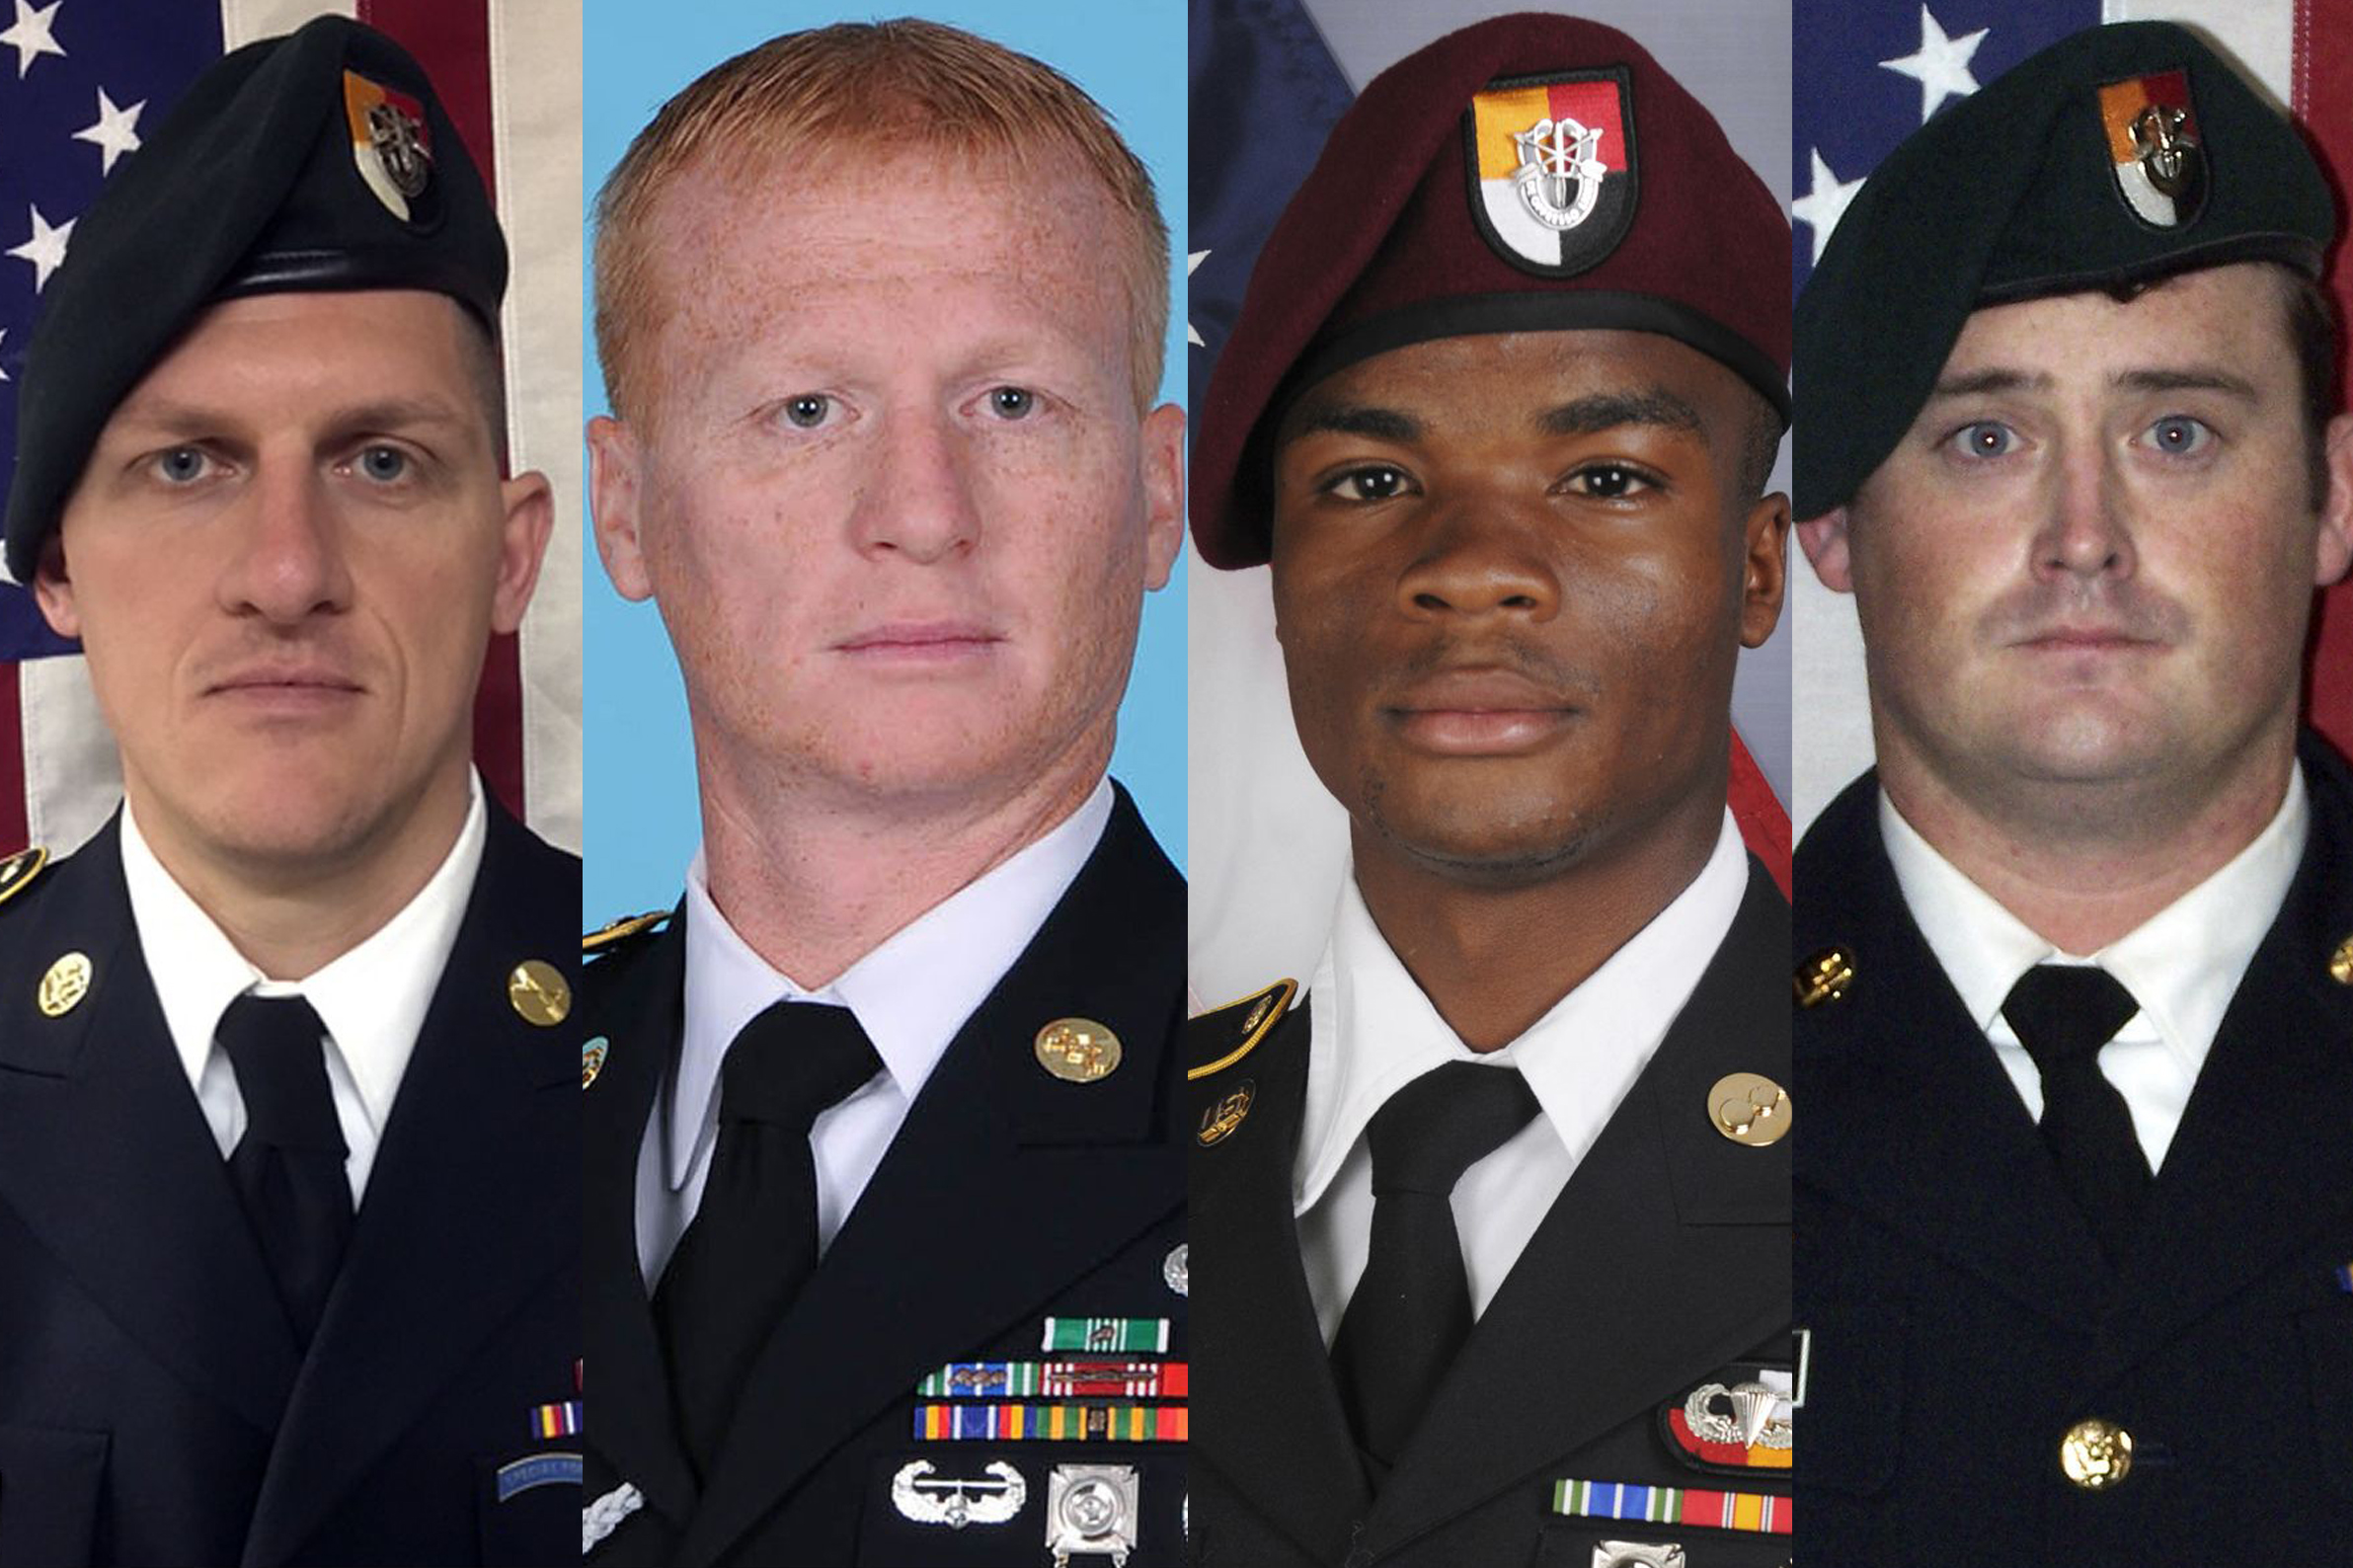 provided by the U.S Army these are photos of the four fallen soldiers in Niger